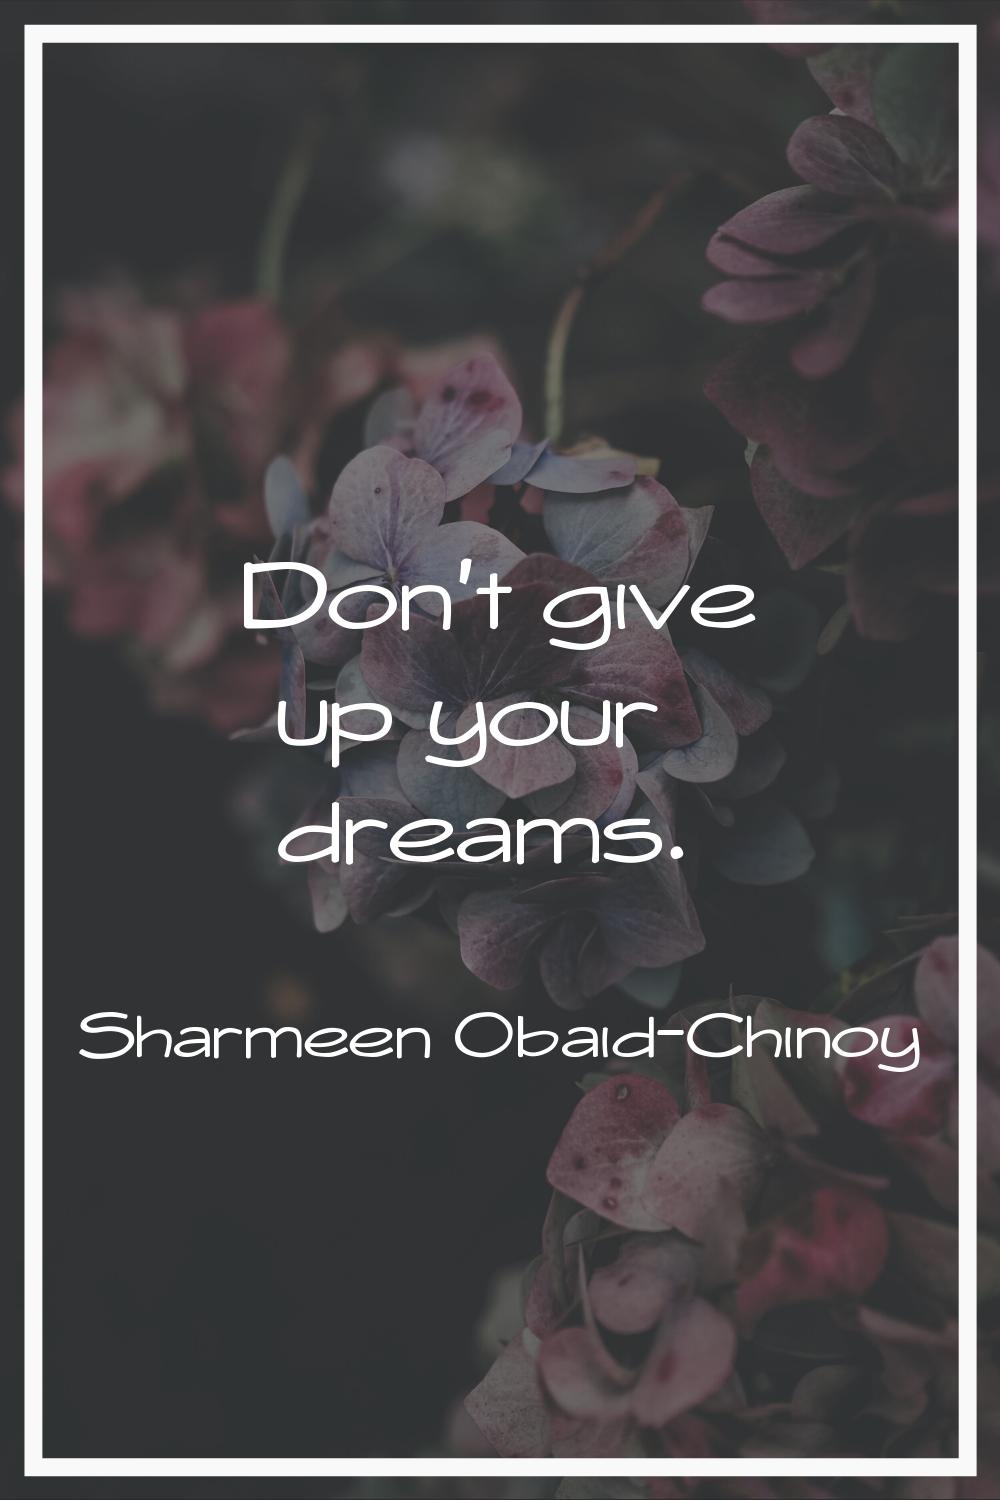 Don't give up your dreams.